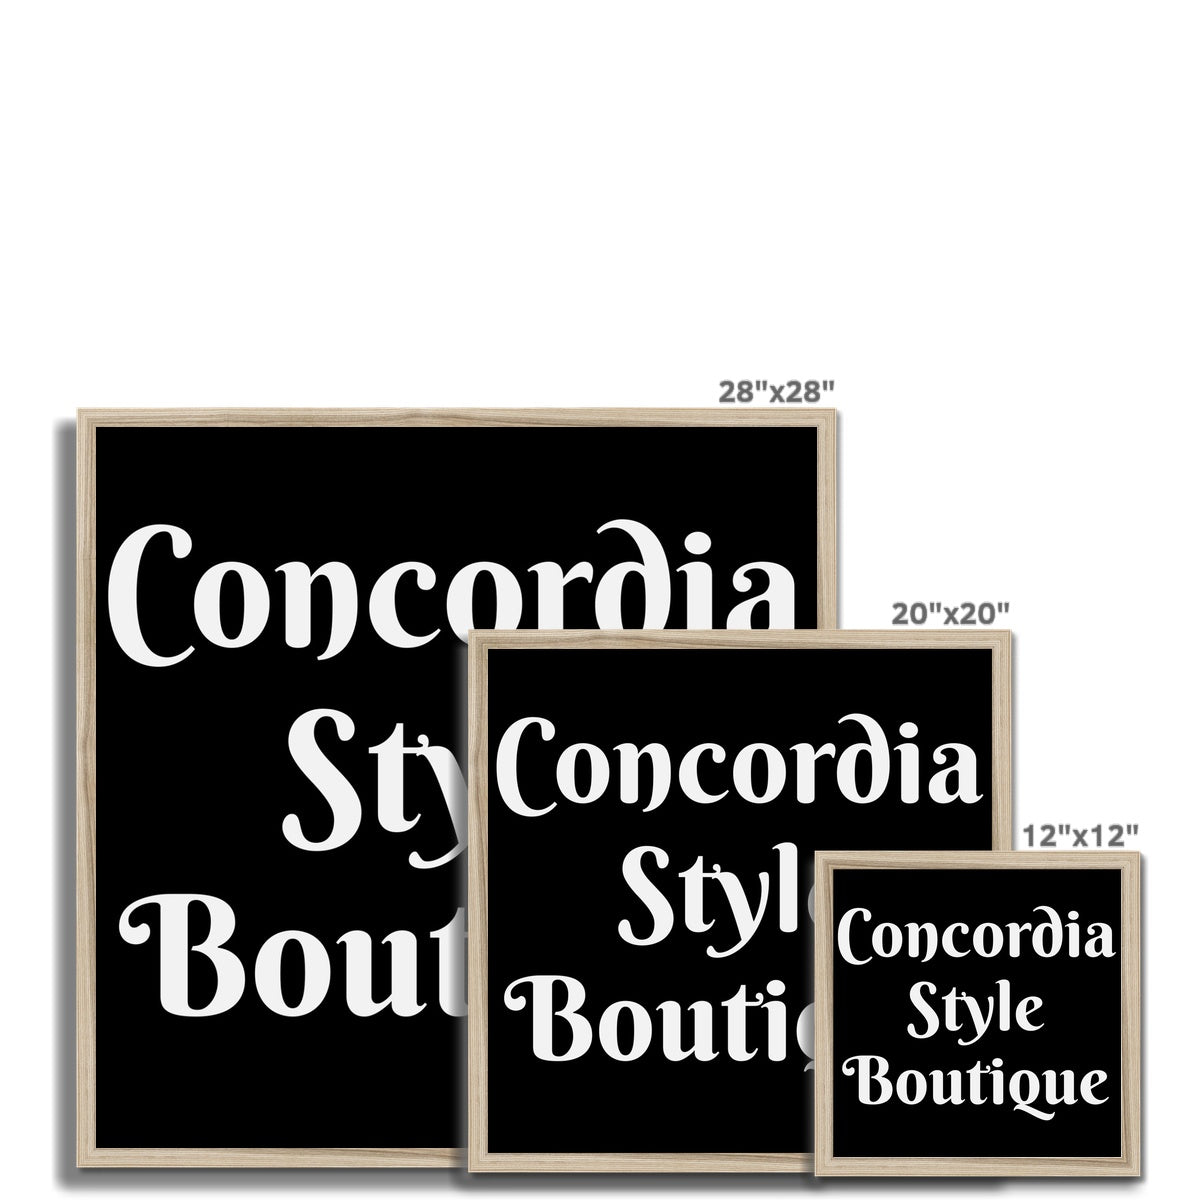 Concordia Style Boutique Framed Print